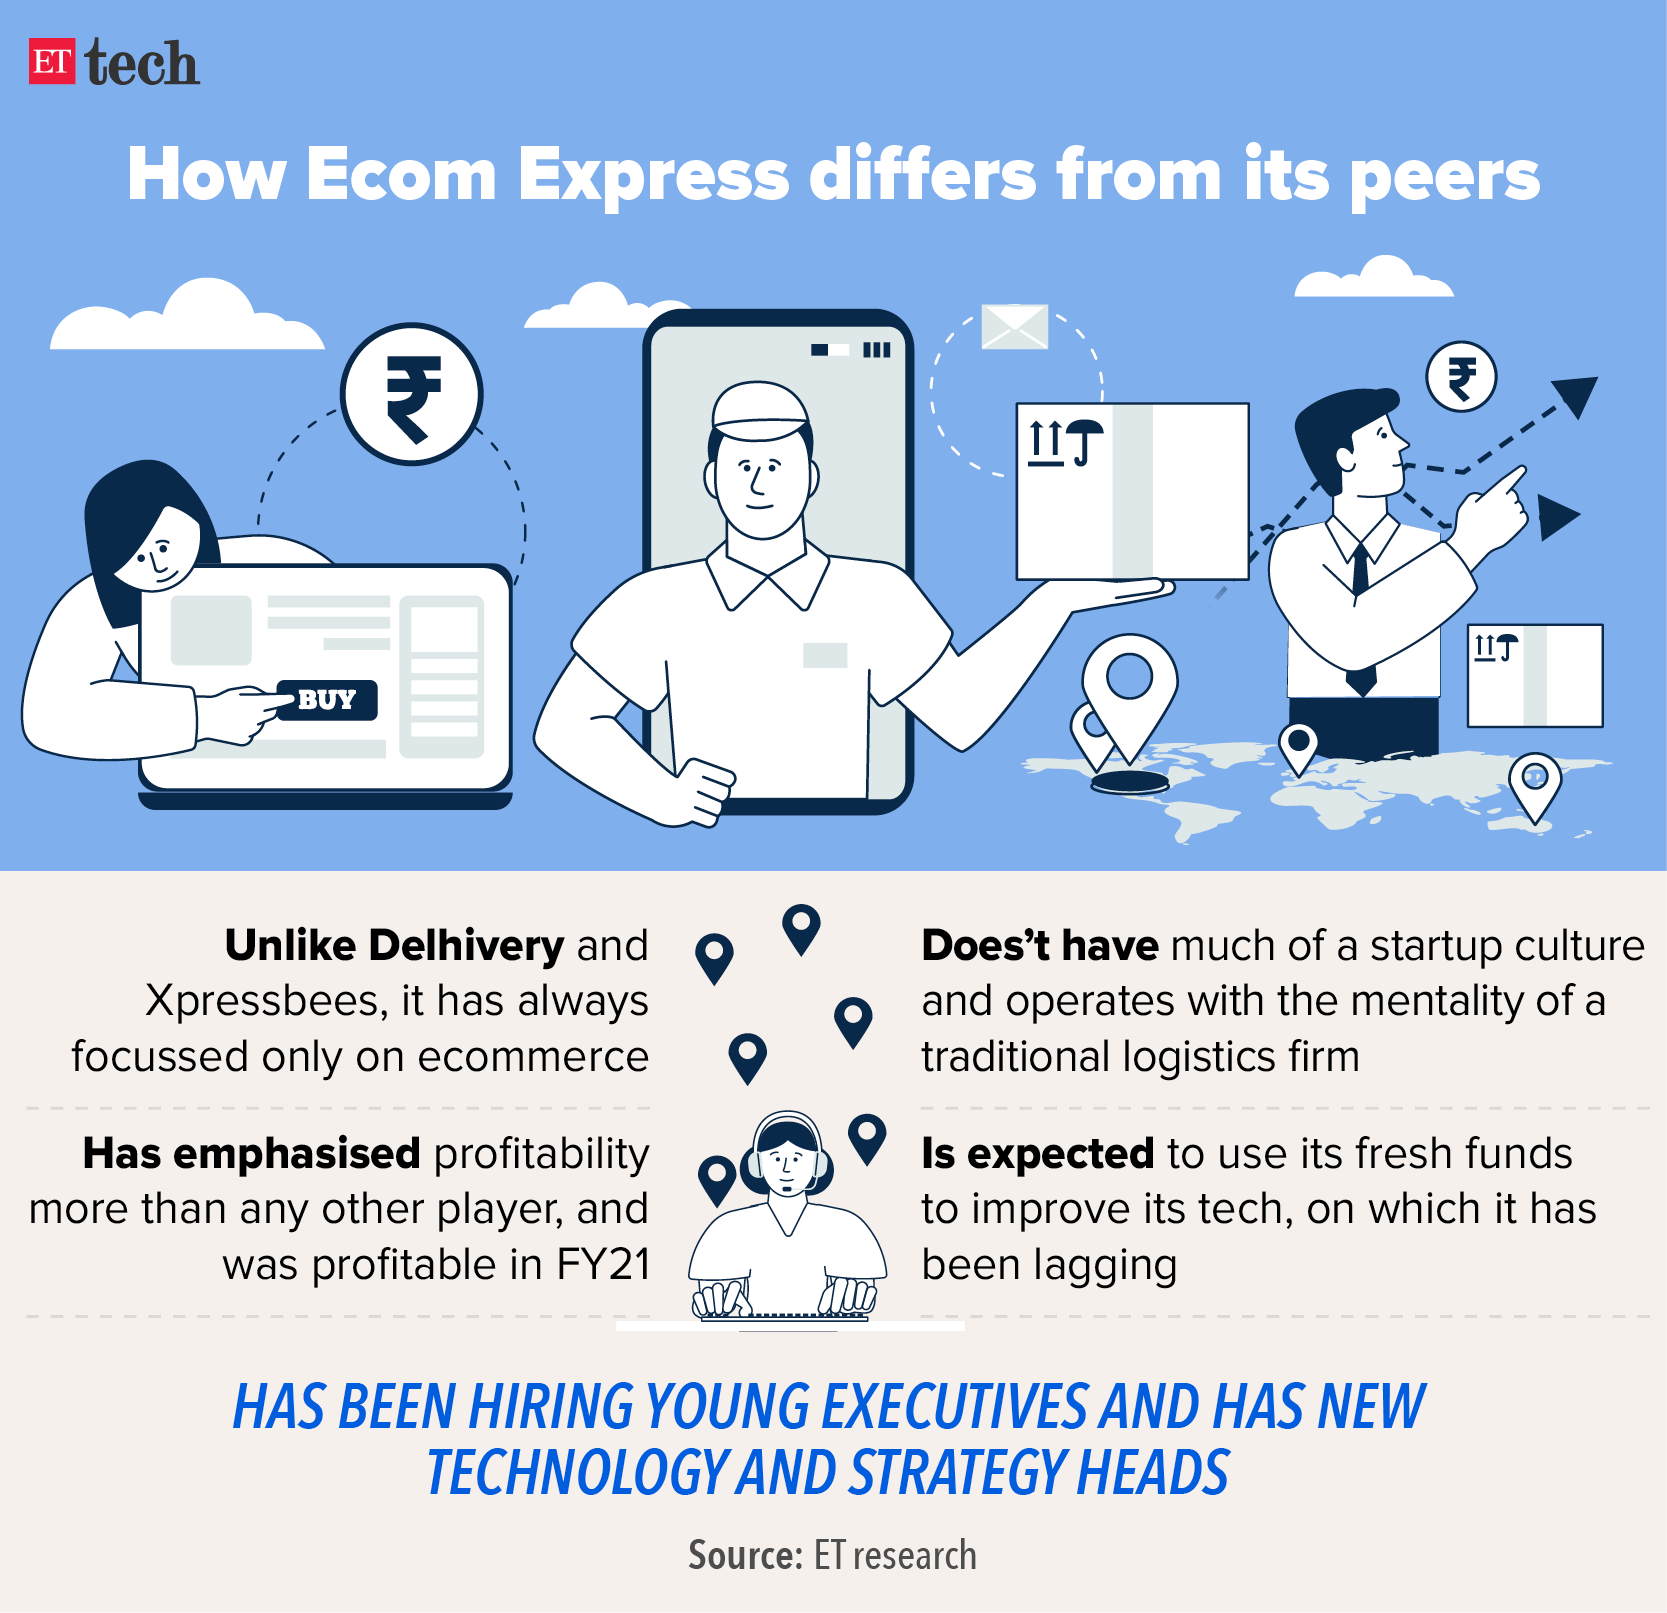 Ecomm express difference